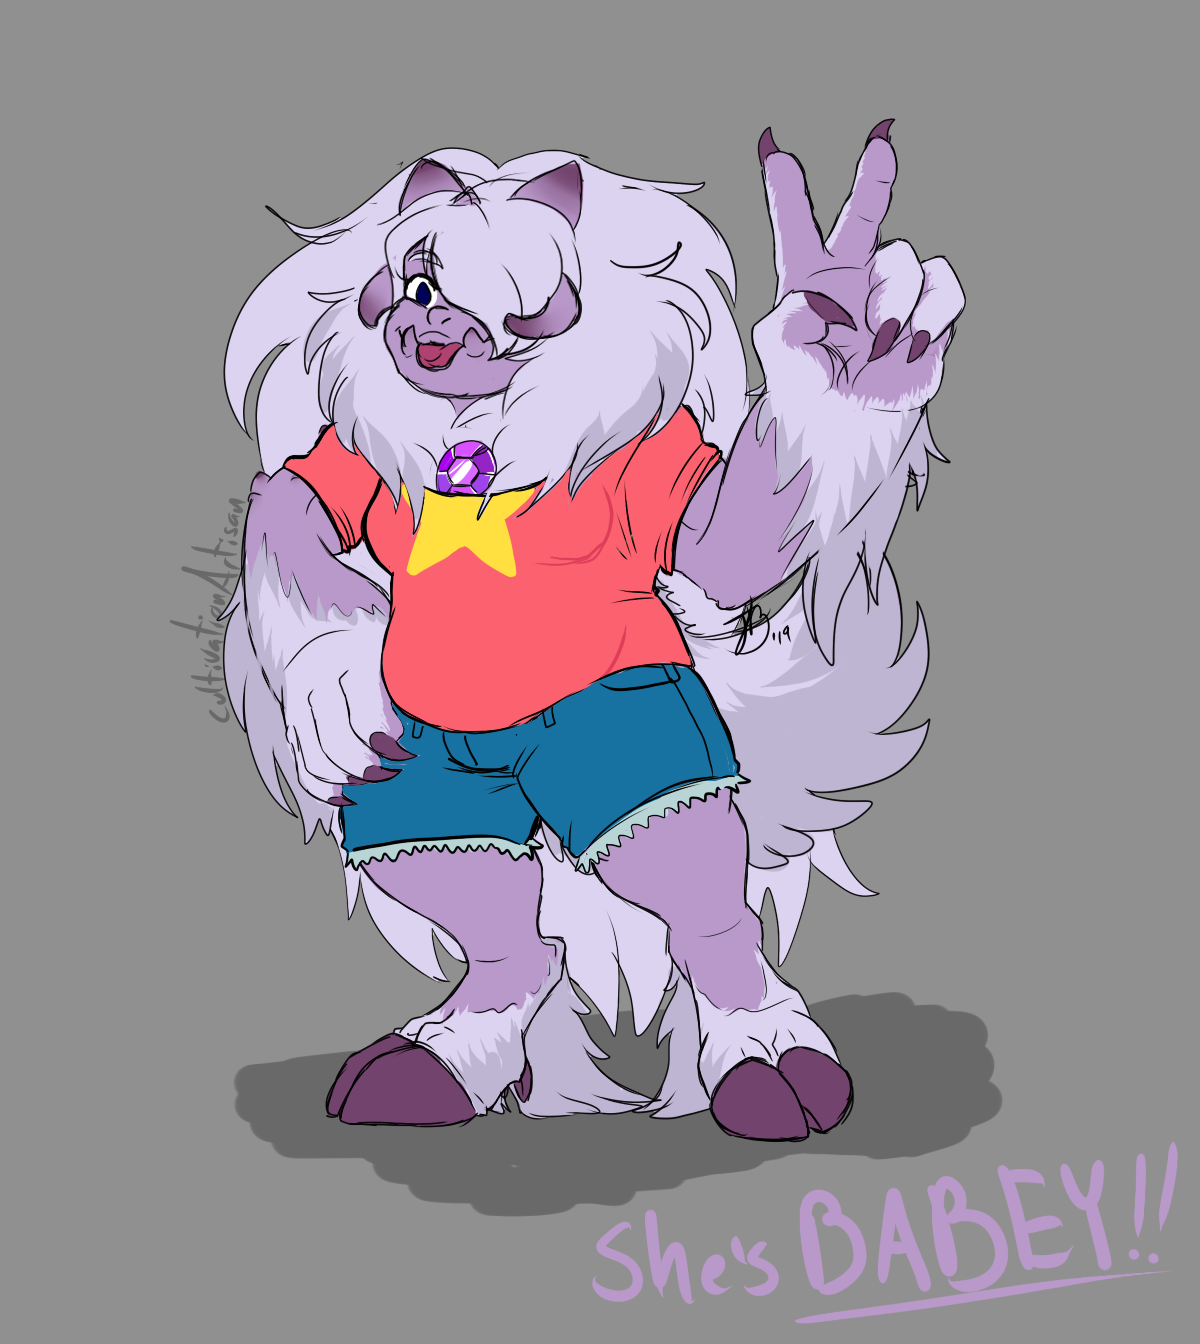 I was asked to do an Amethyst version! She’s basically a mop.